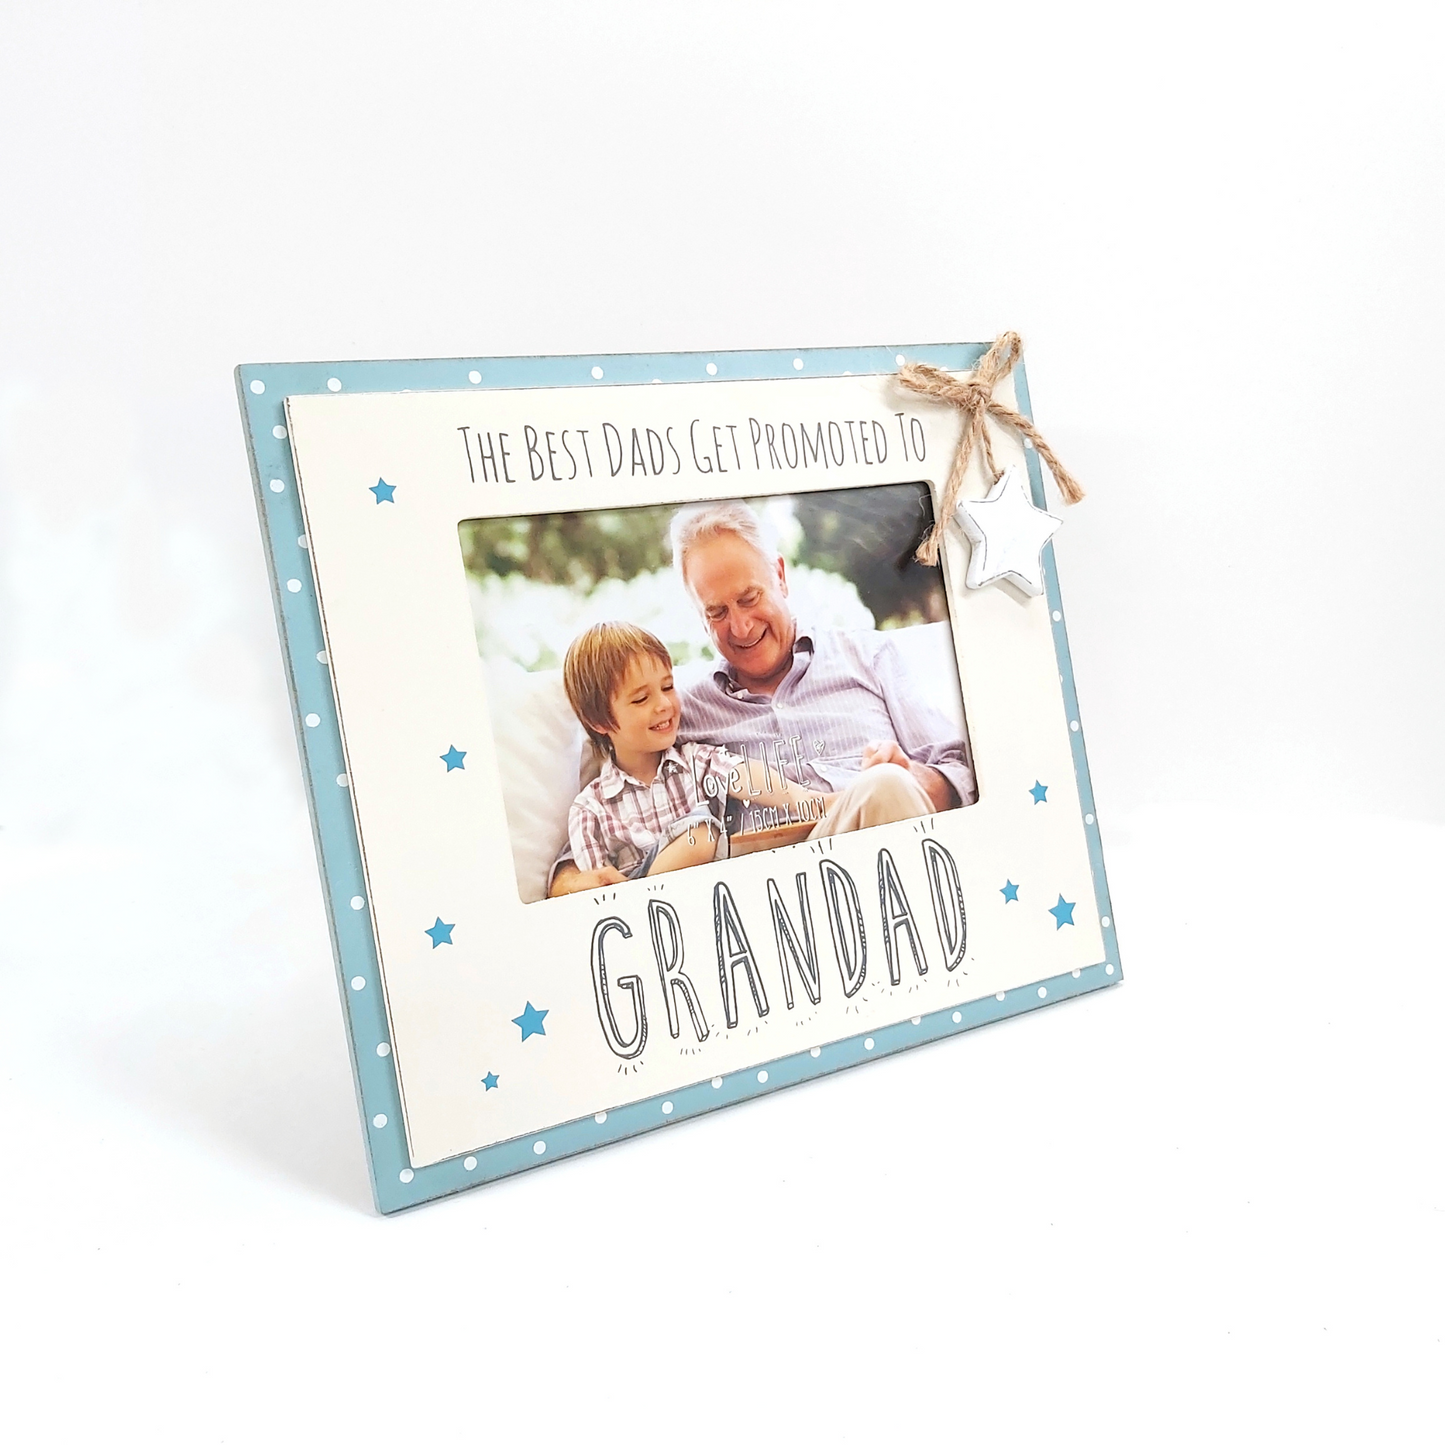 Love Life Best Dads Get Promoted To Grandad Photo Frame